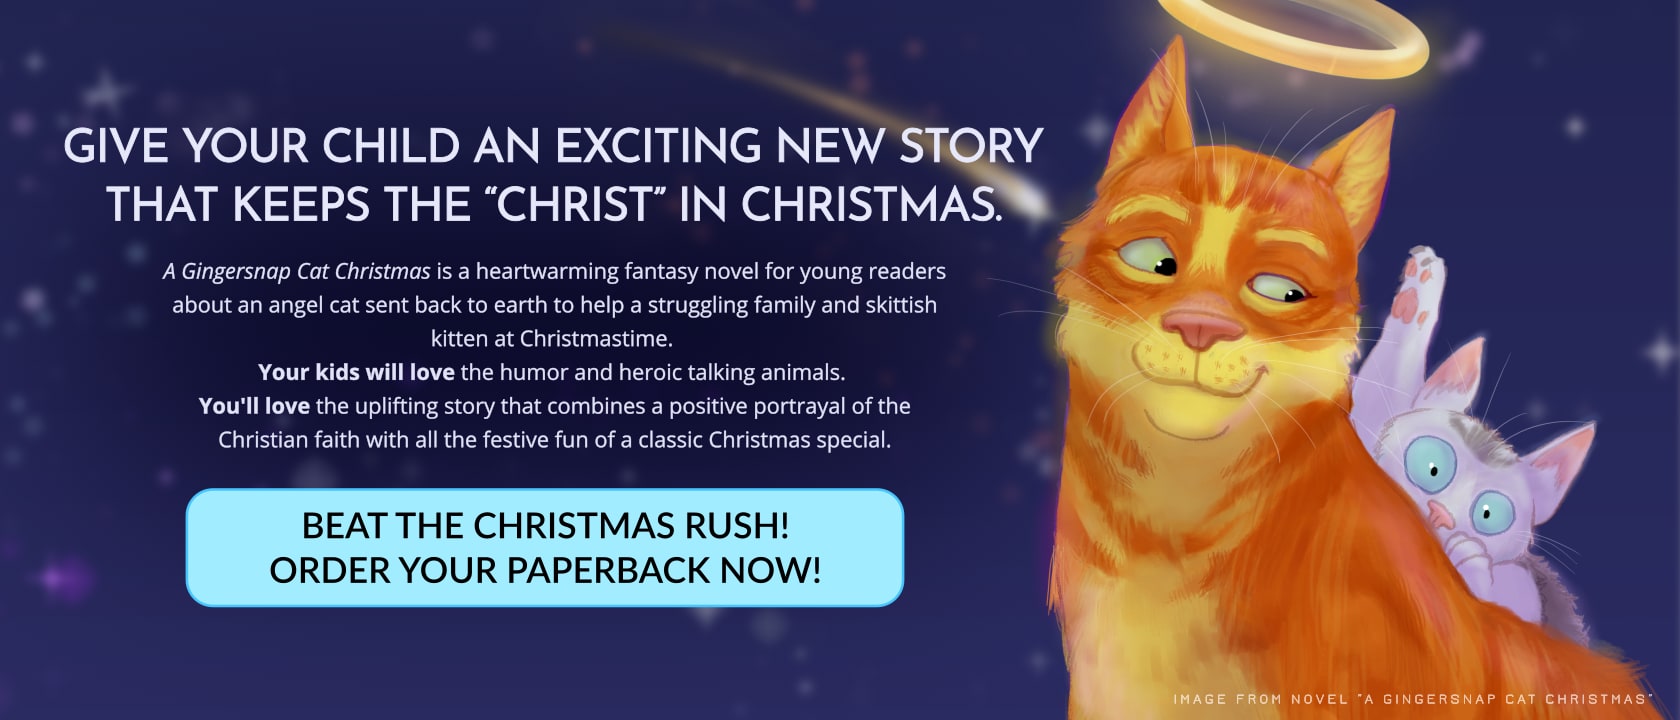 A ginger cat with a halo smiles at a terrified white and grey kitten hiding behind him against a starry blue sky. Text reads: GIVE YOUR CHILD AN EXCITING NEW STORY THAT KEEPS THE “CHRIST” IN CHRISTMAS. A Gingersnap Cat Christmas is a heartwarming fantasy novel for young readers about an angel cat sent back to earth to help a struggling family and skittish kitten at Christmastime. Your kids will love the humor and heroic talking animals. You'll love the uplifting story that combines a positive portrayal of the Christian faith with all the festive fun of a classic Christmas special. Button reads: Beat the Christmas rush! Order your paperback now!